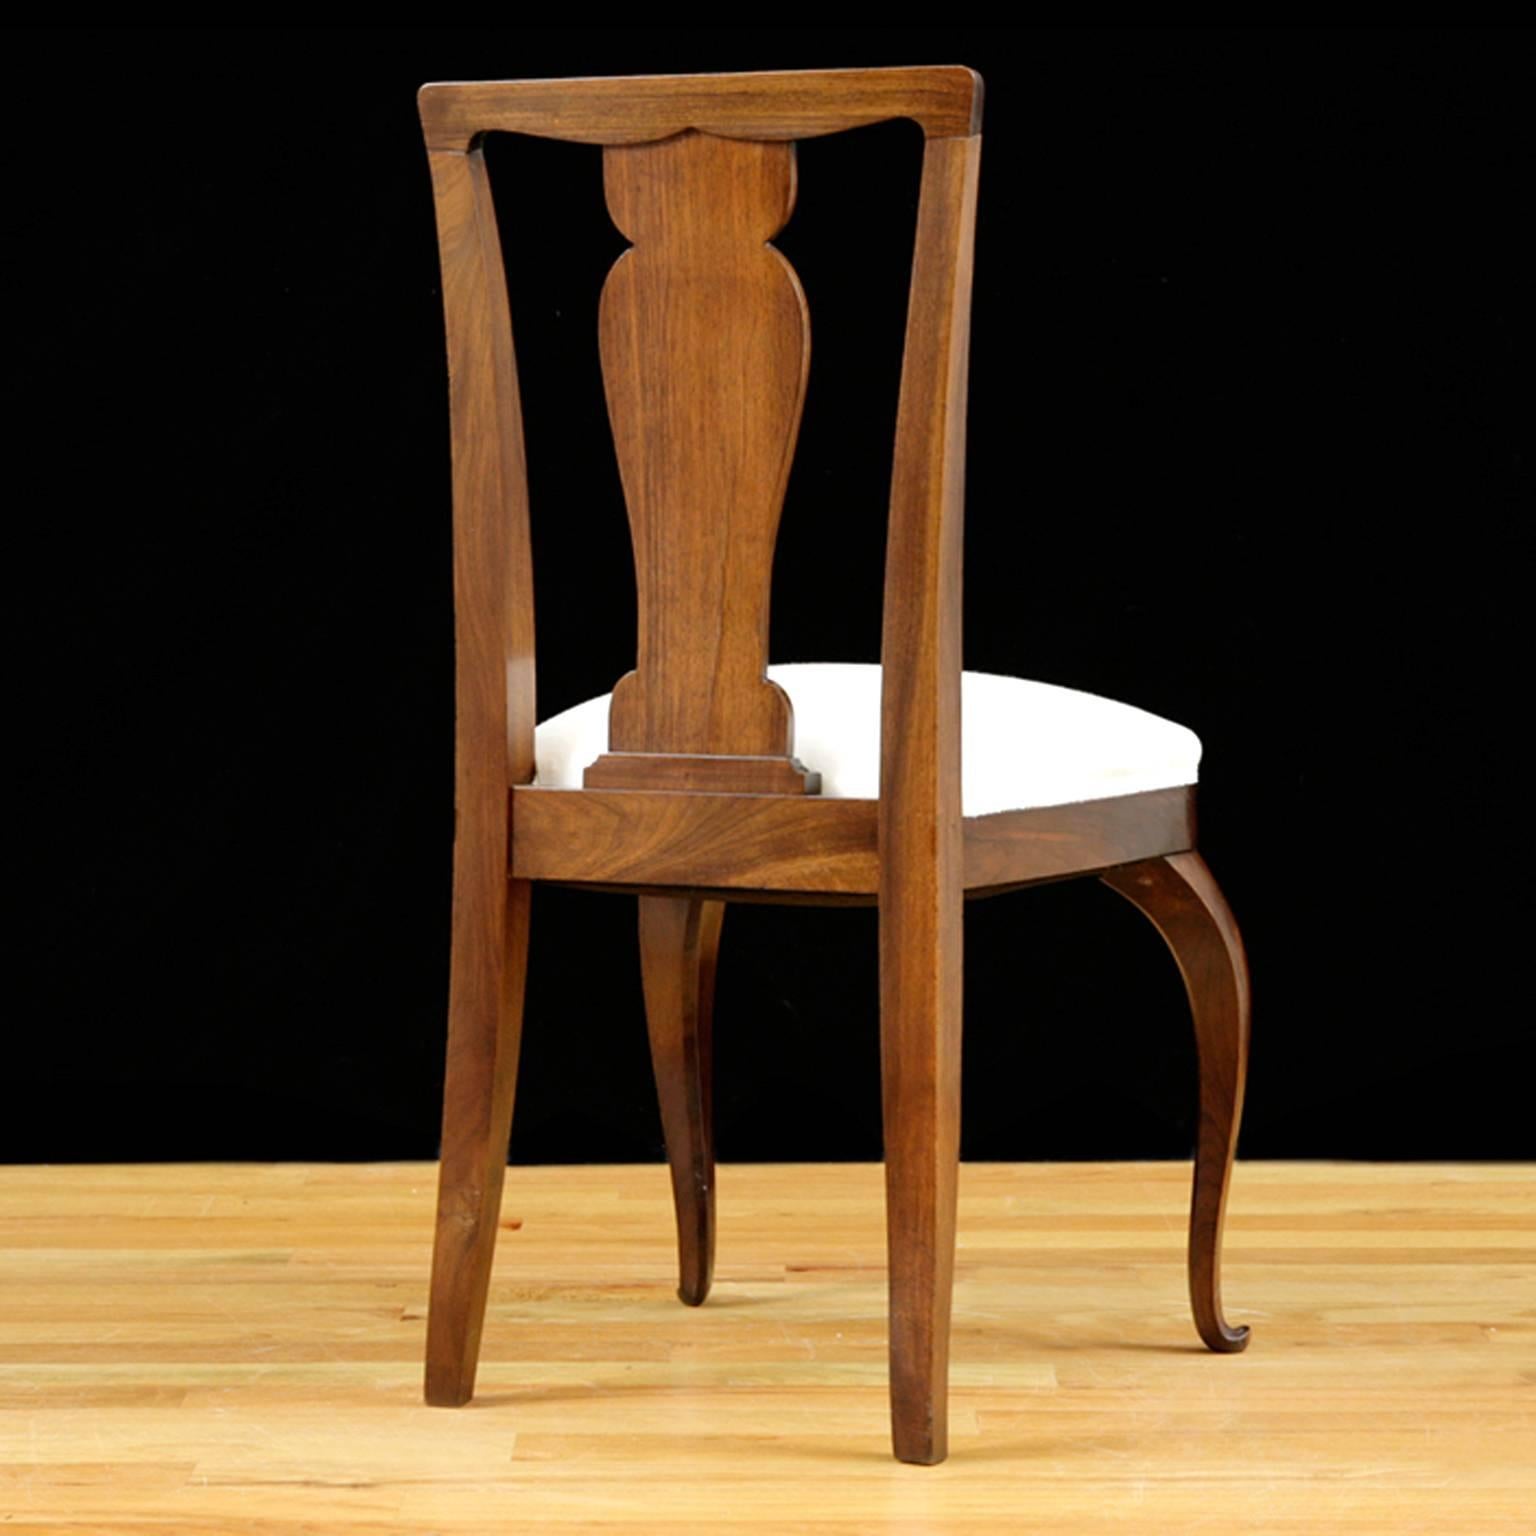 European Set of Four Dining Chairs in Rosewood with Upholstered Seat, circa 1910